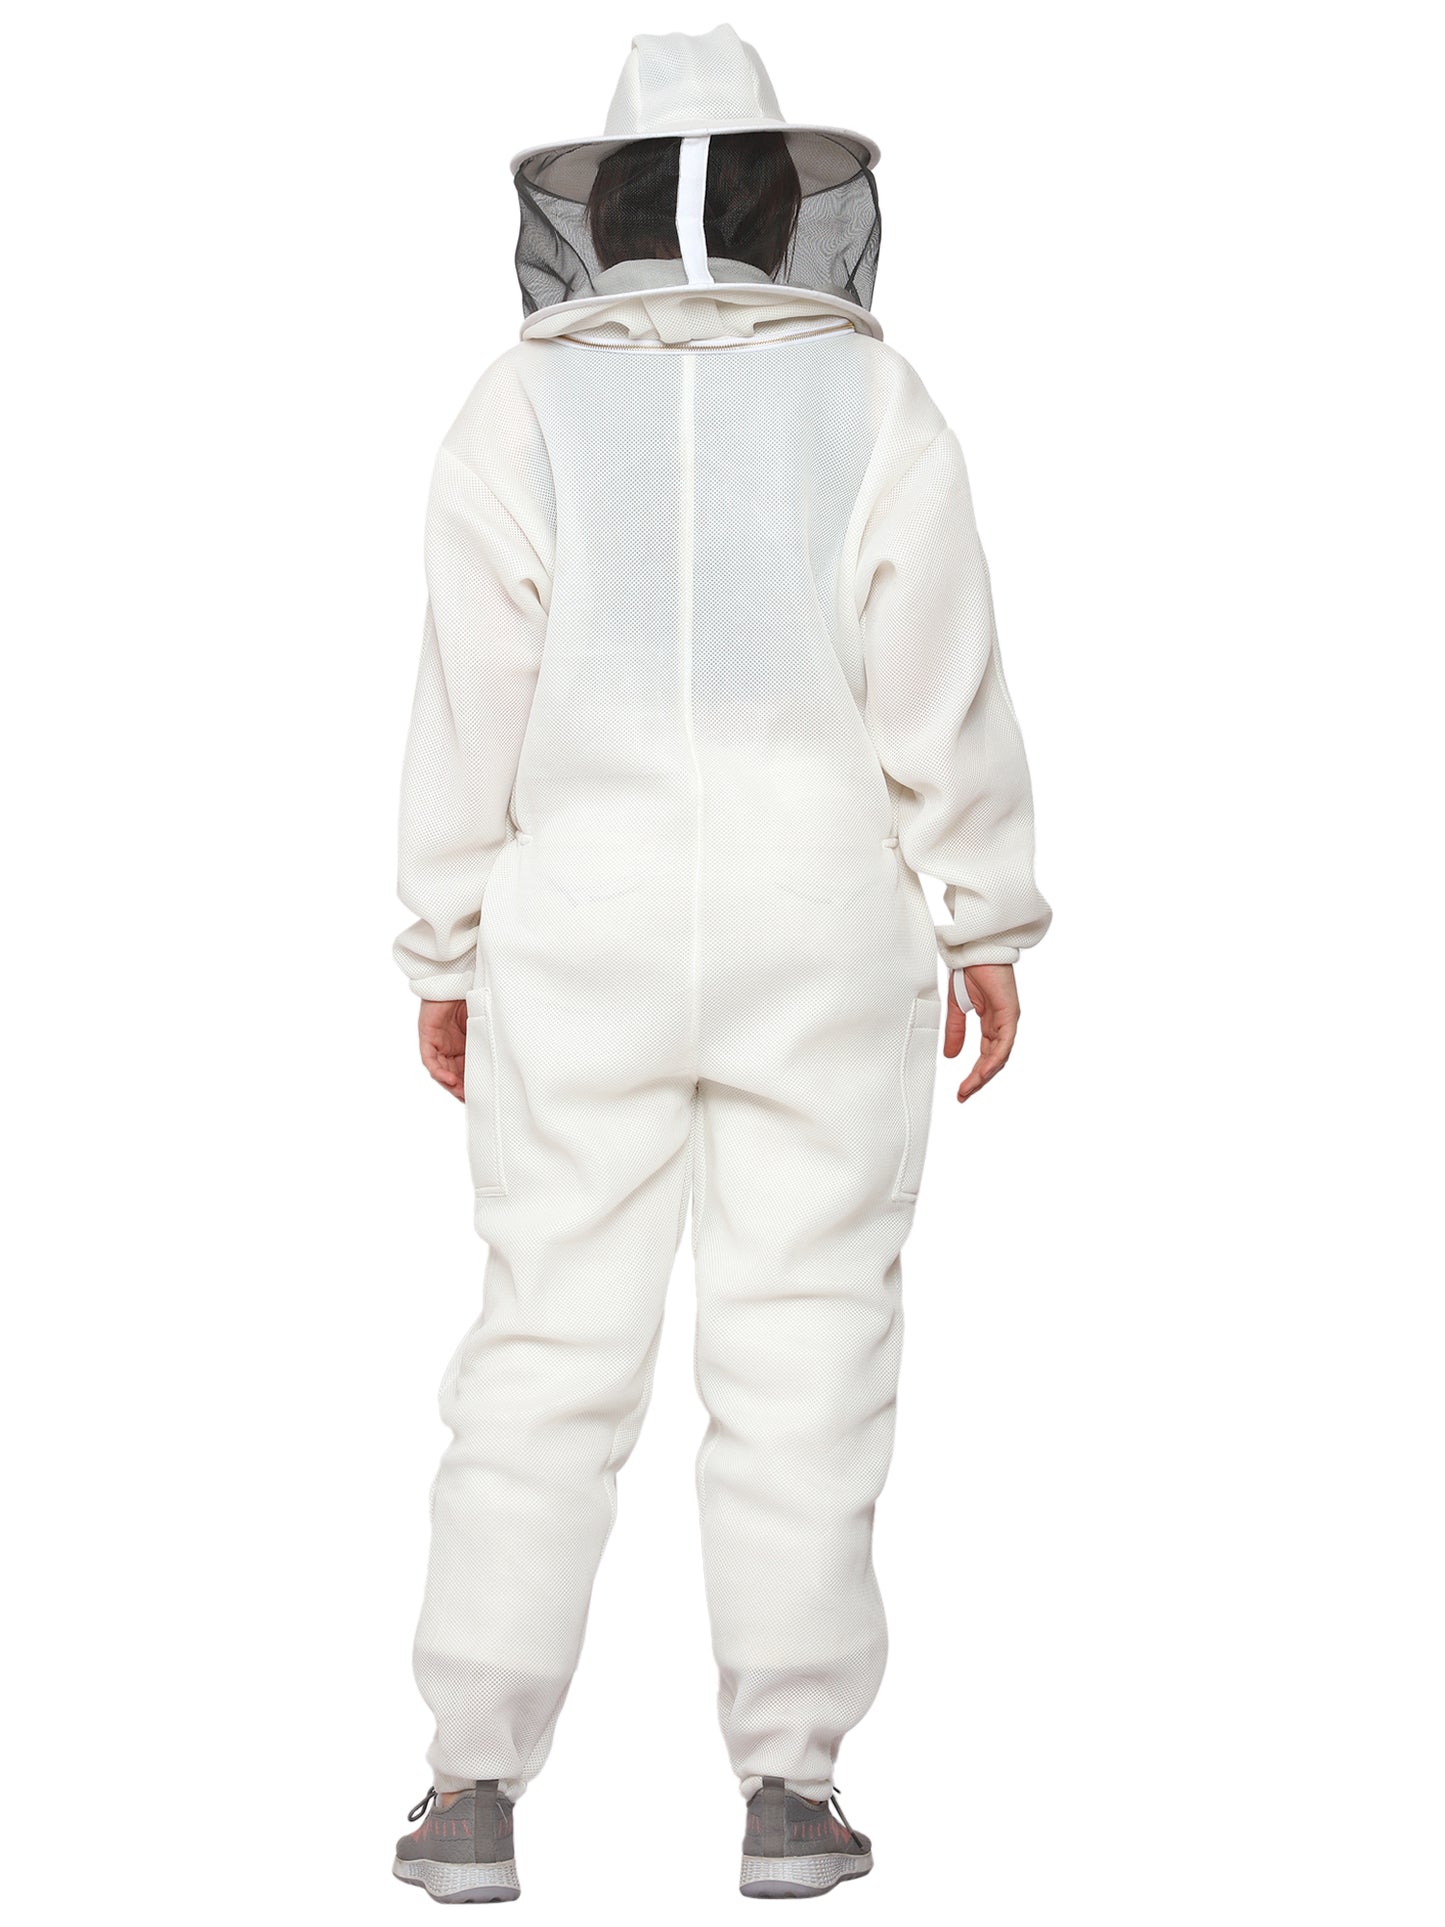 Beeattire Airmesh Ventilated beekeeping Suit White Color with Round Hood